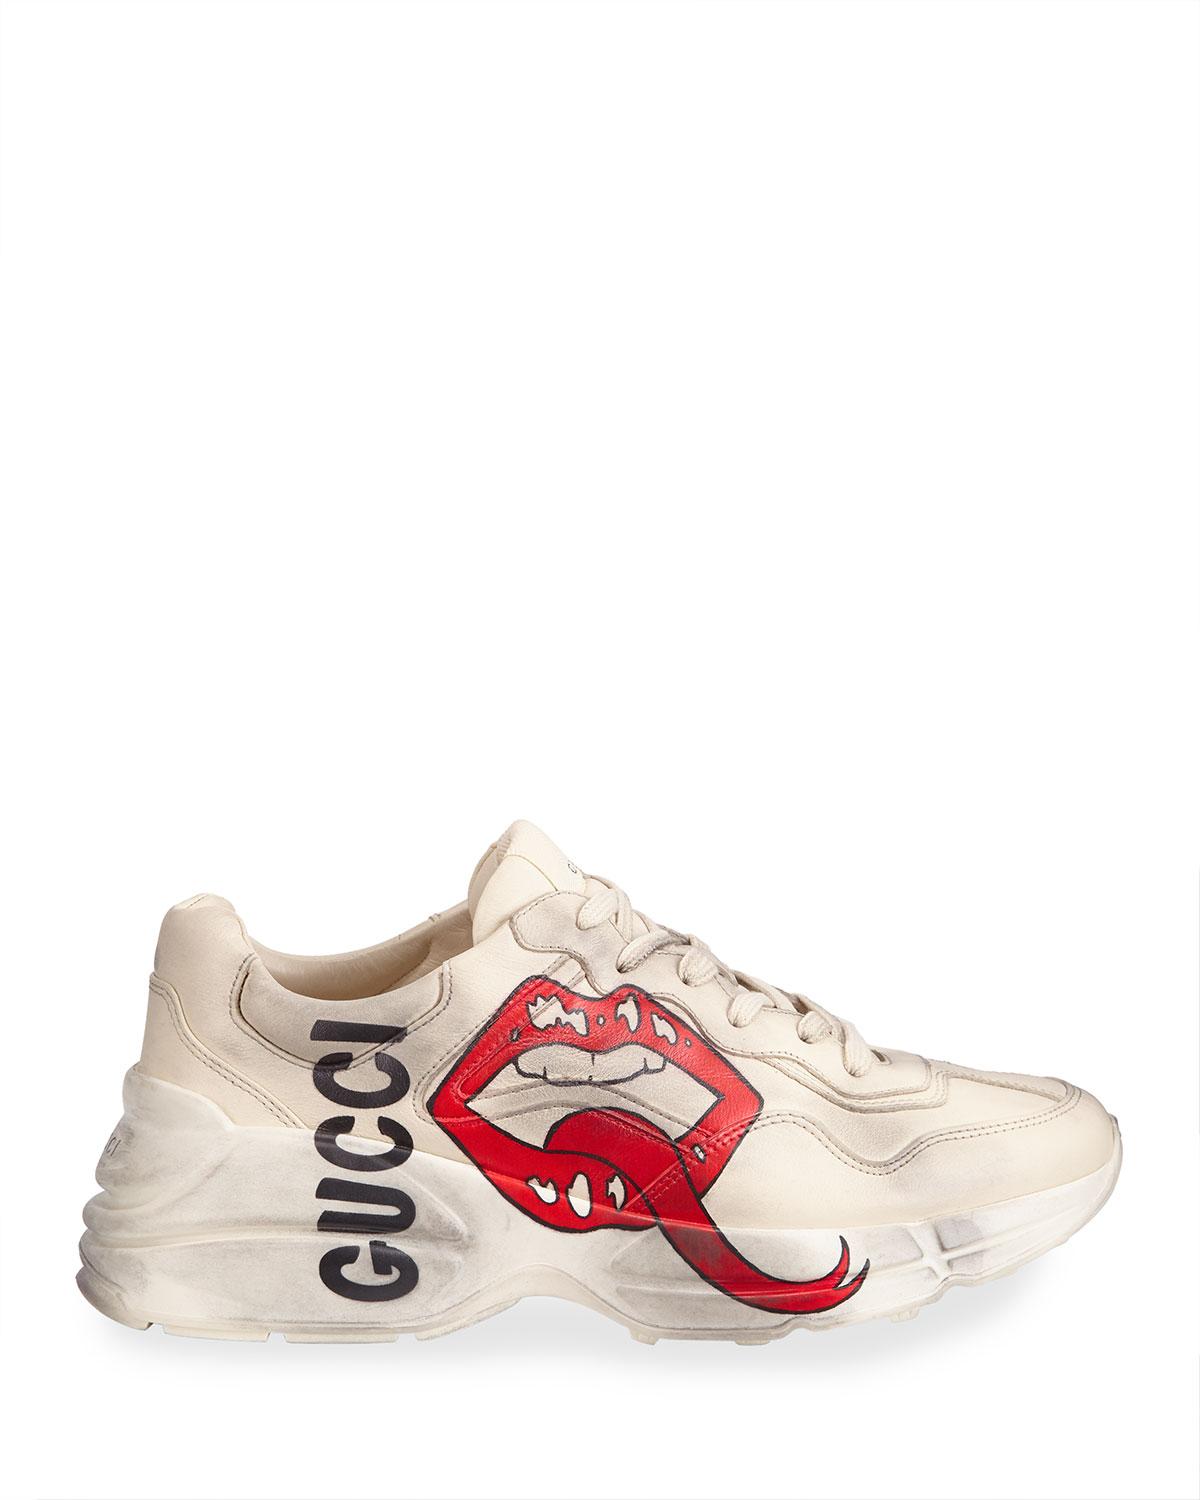 Gucci Rhyton Sneaker With Mouth Print in Ivory (White) for Men - Save ...